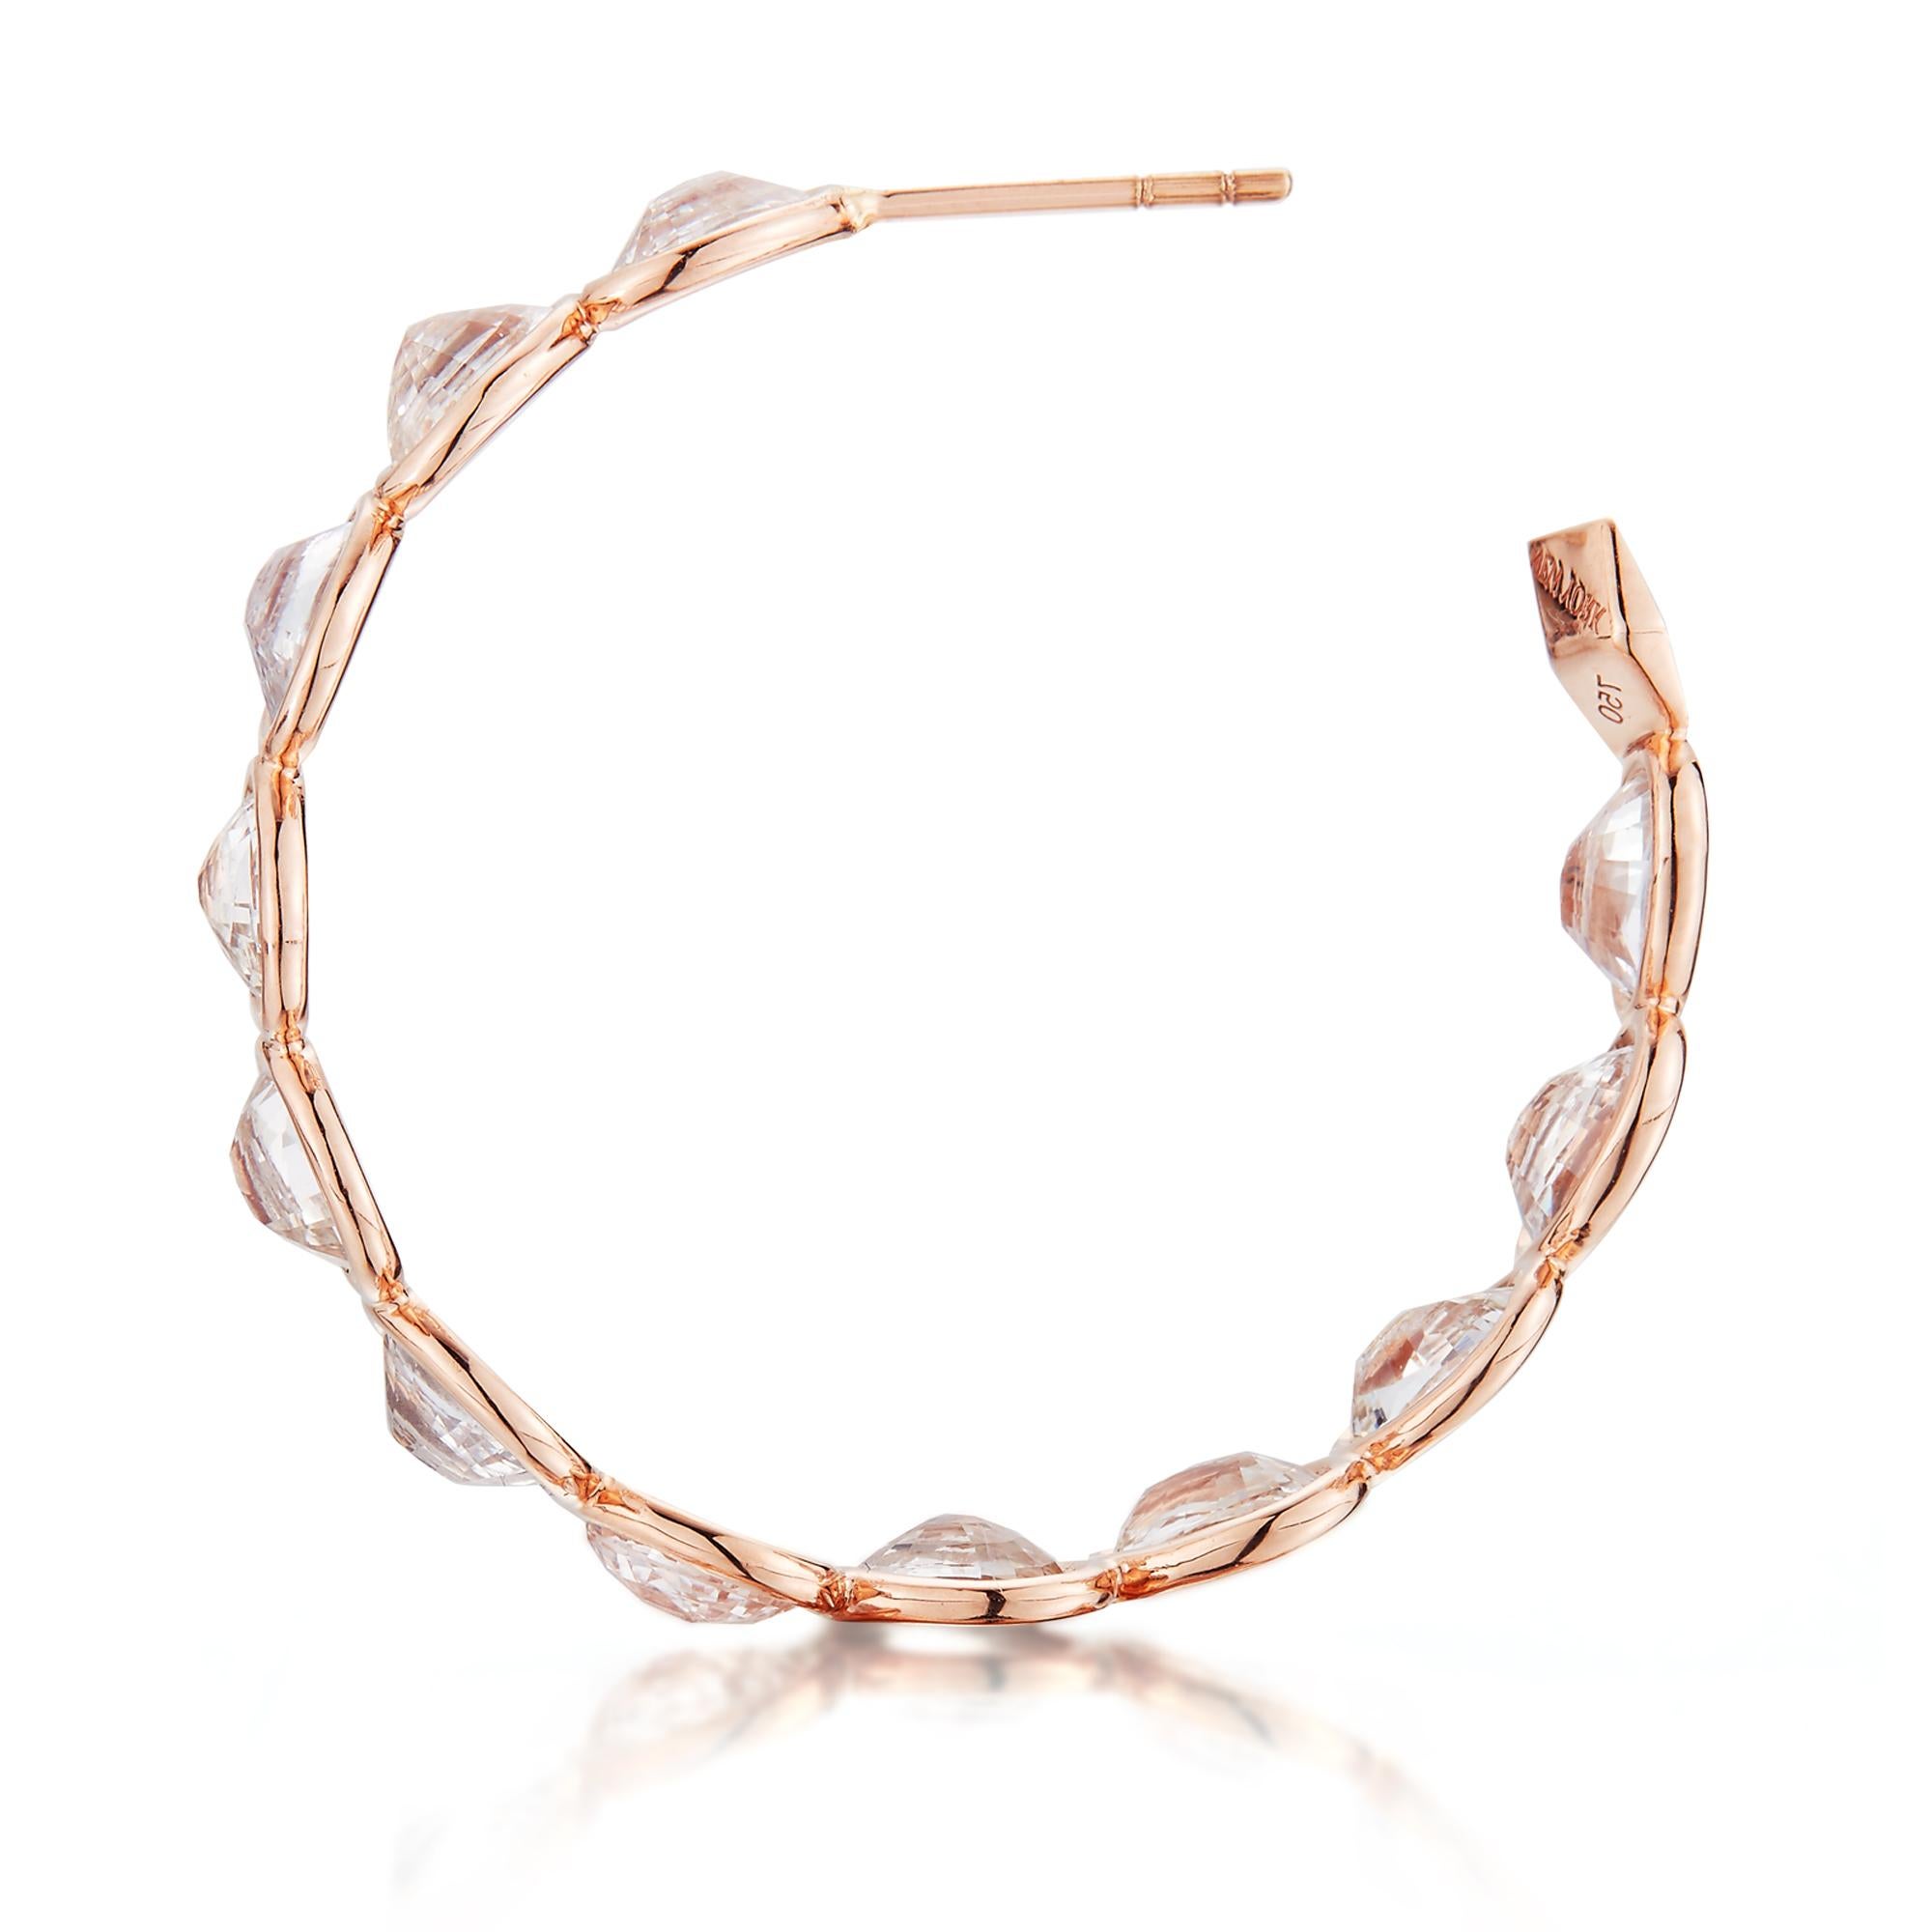 18kt rose gold Ombré hoop earrings with bezel set multishade oval white sapphires at 11 o'clock® and signature Brillante® motif, medium.

Reimagined from summers spent at the Tuscan shore, the Ombré collection highlights the diverse hues and